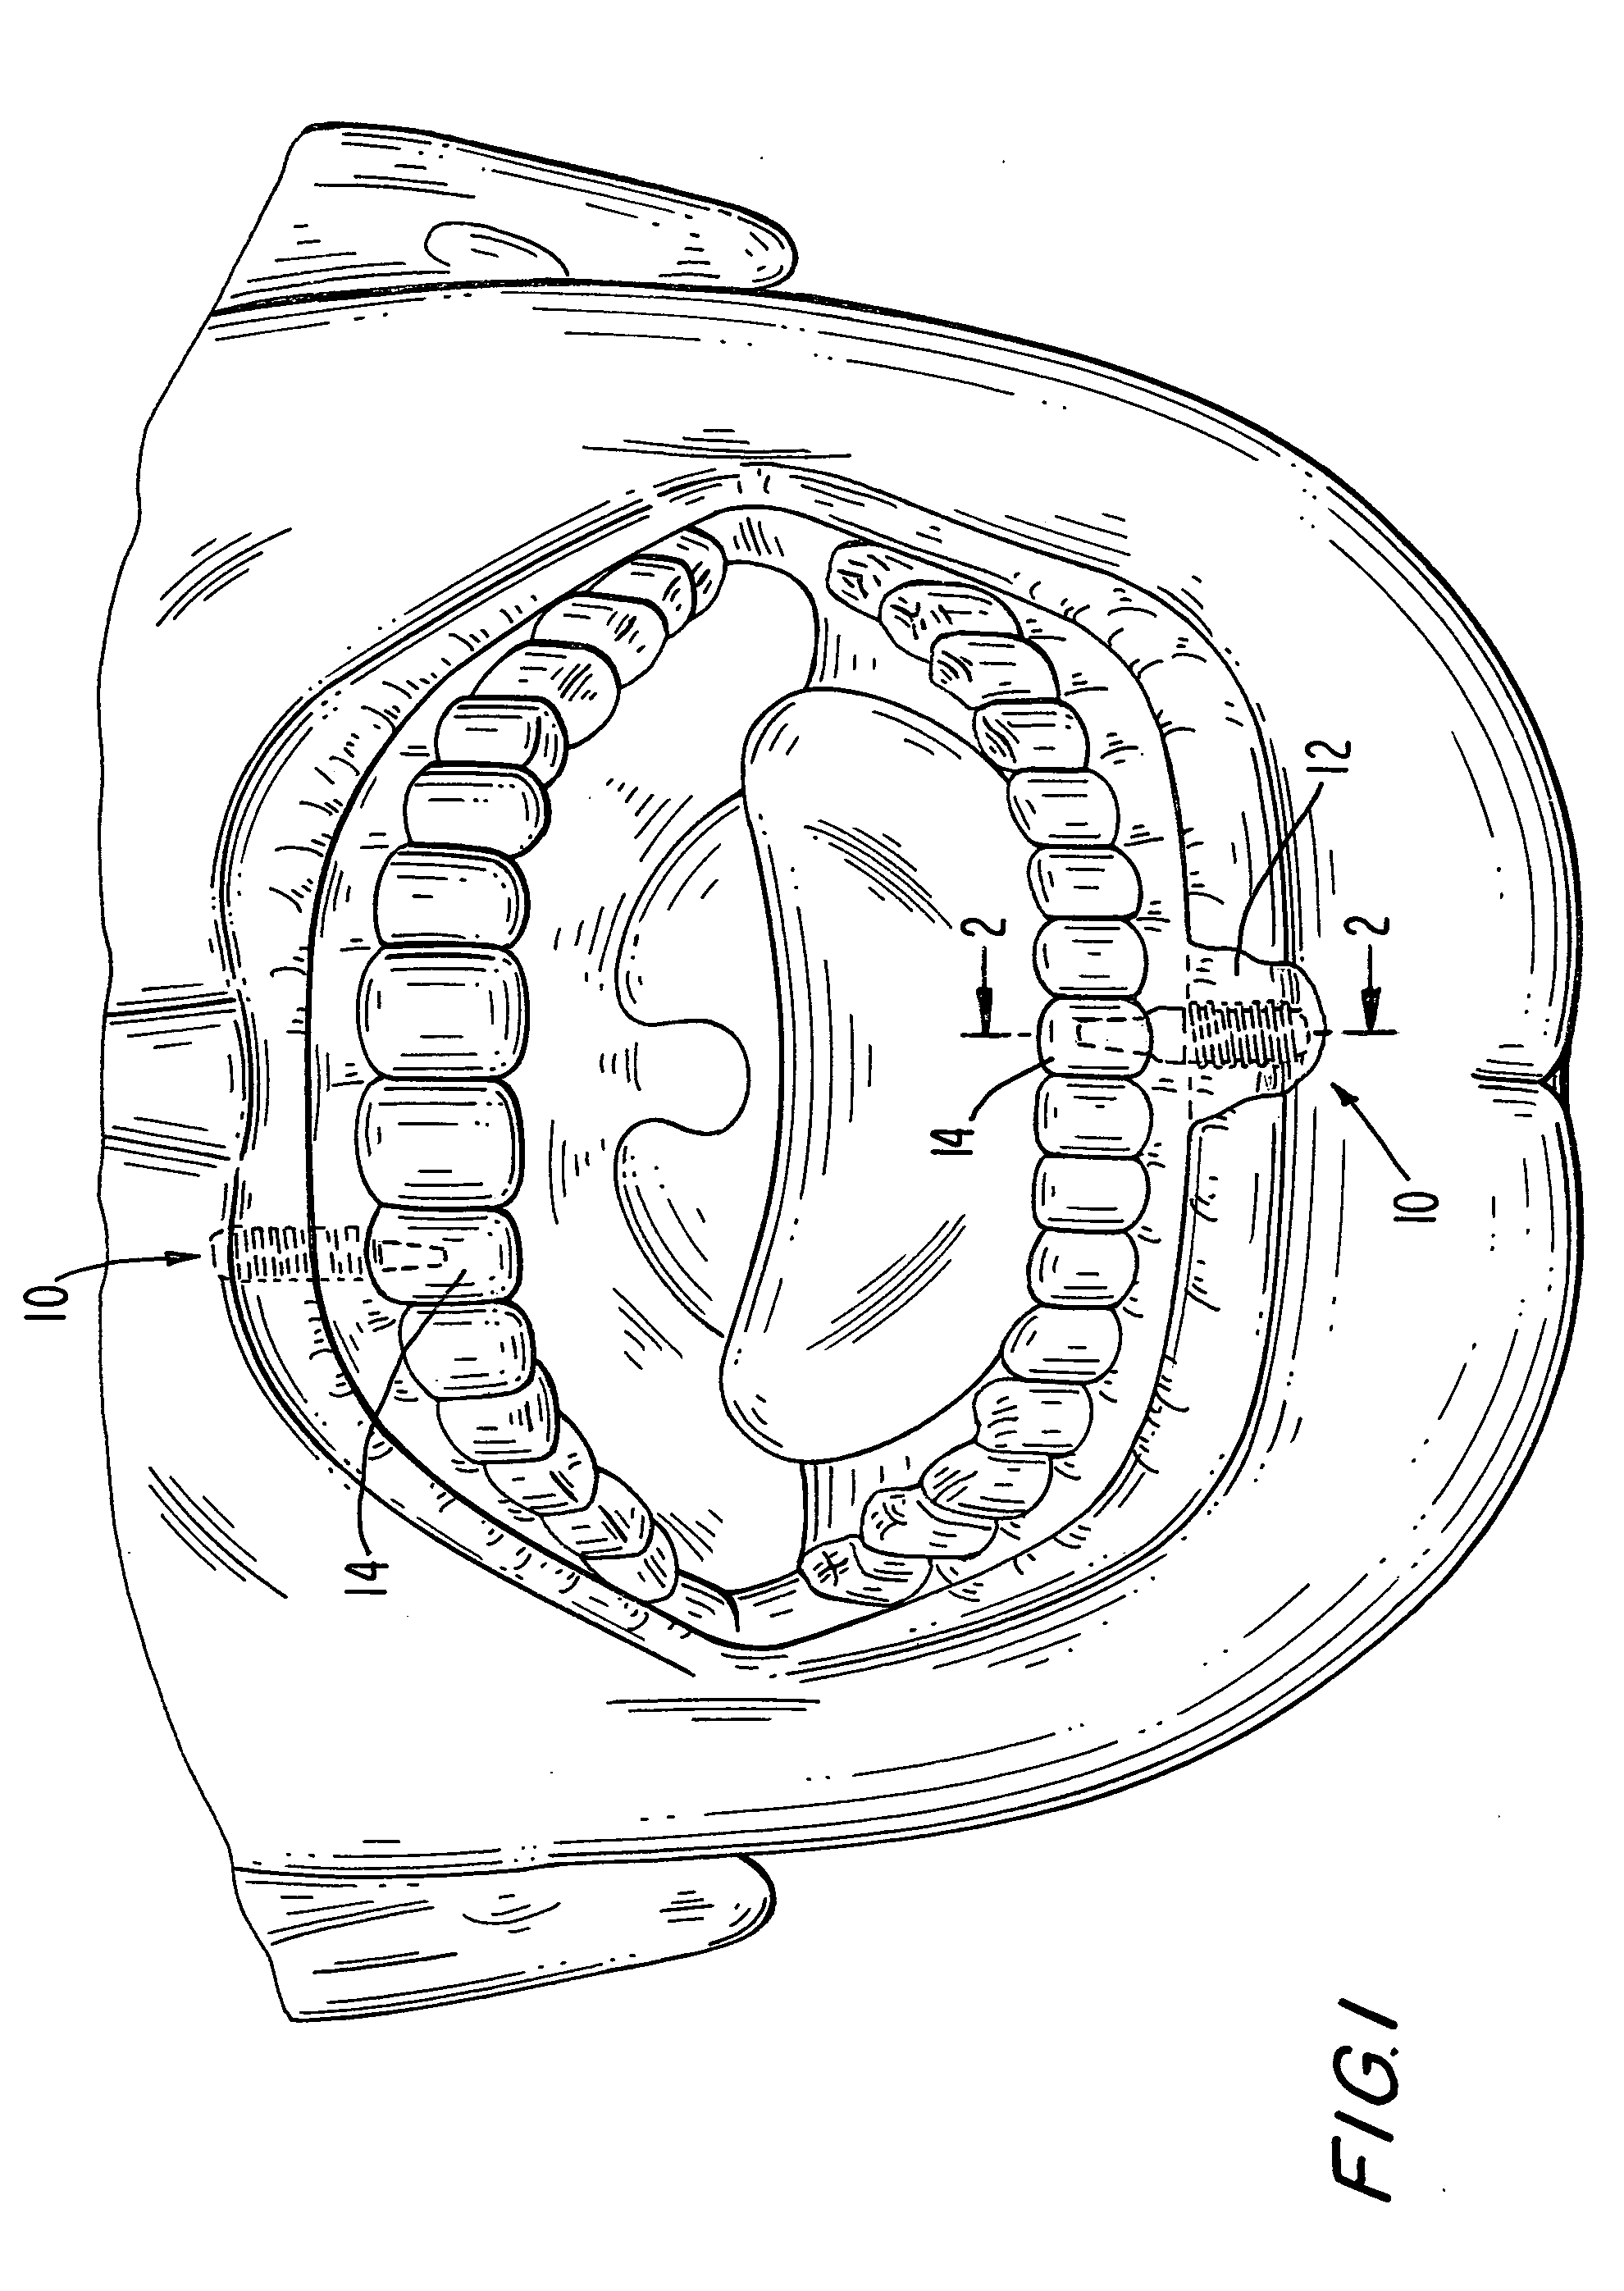 Aesthetic dental implant fixture and abutment system